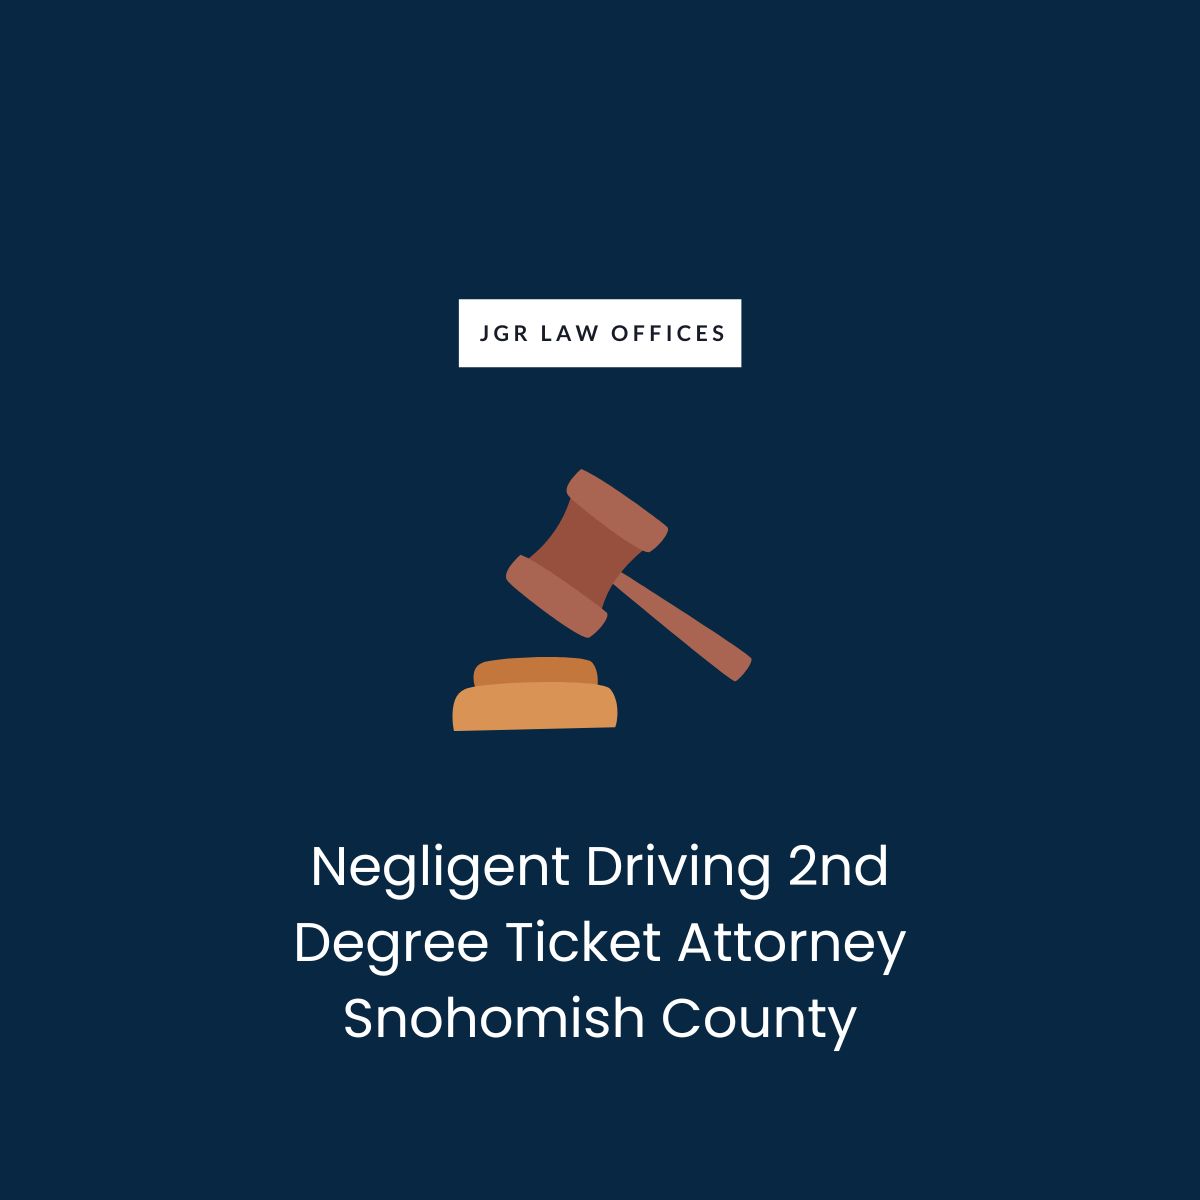 Negligent Driving 2nd Degree Ticket Attorney Snohomish County